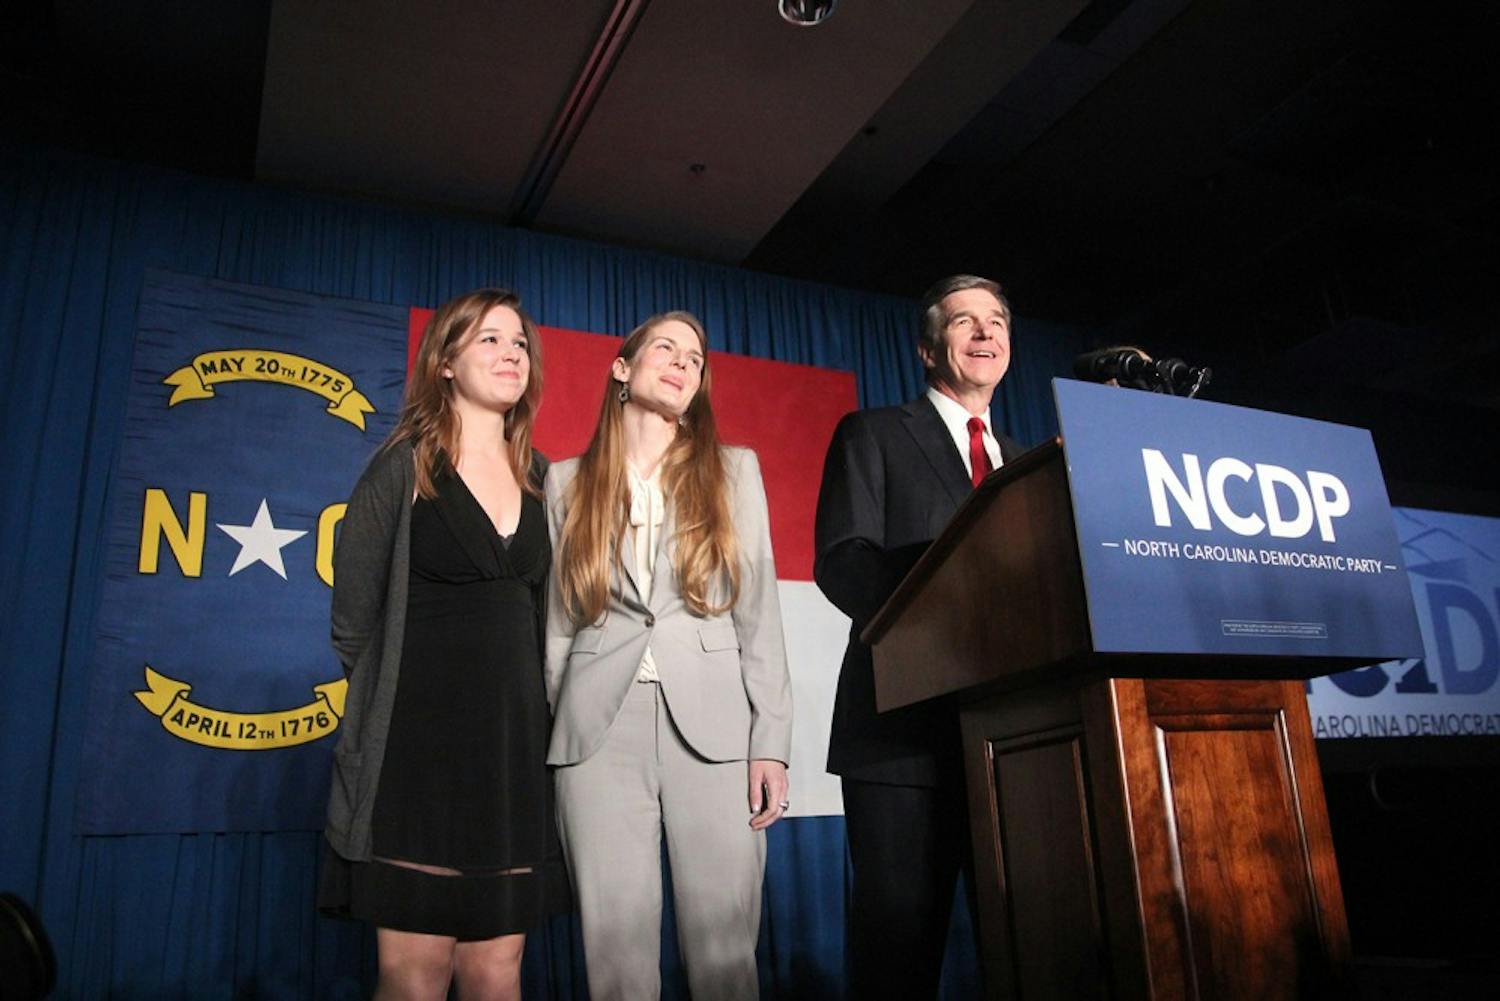 North Carolina Democratic Gubernatorial candidate Roy Cooper speaks at the North Carolina Democratic Party in Raleigh. Cooper officially was announced the winner on Dec. 5.&nbsp;